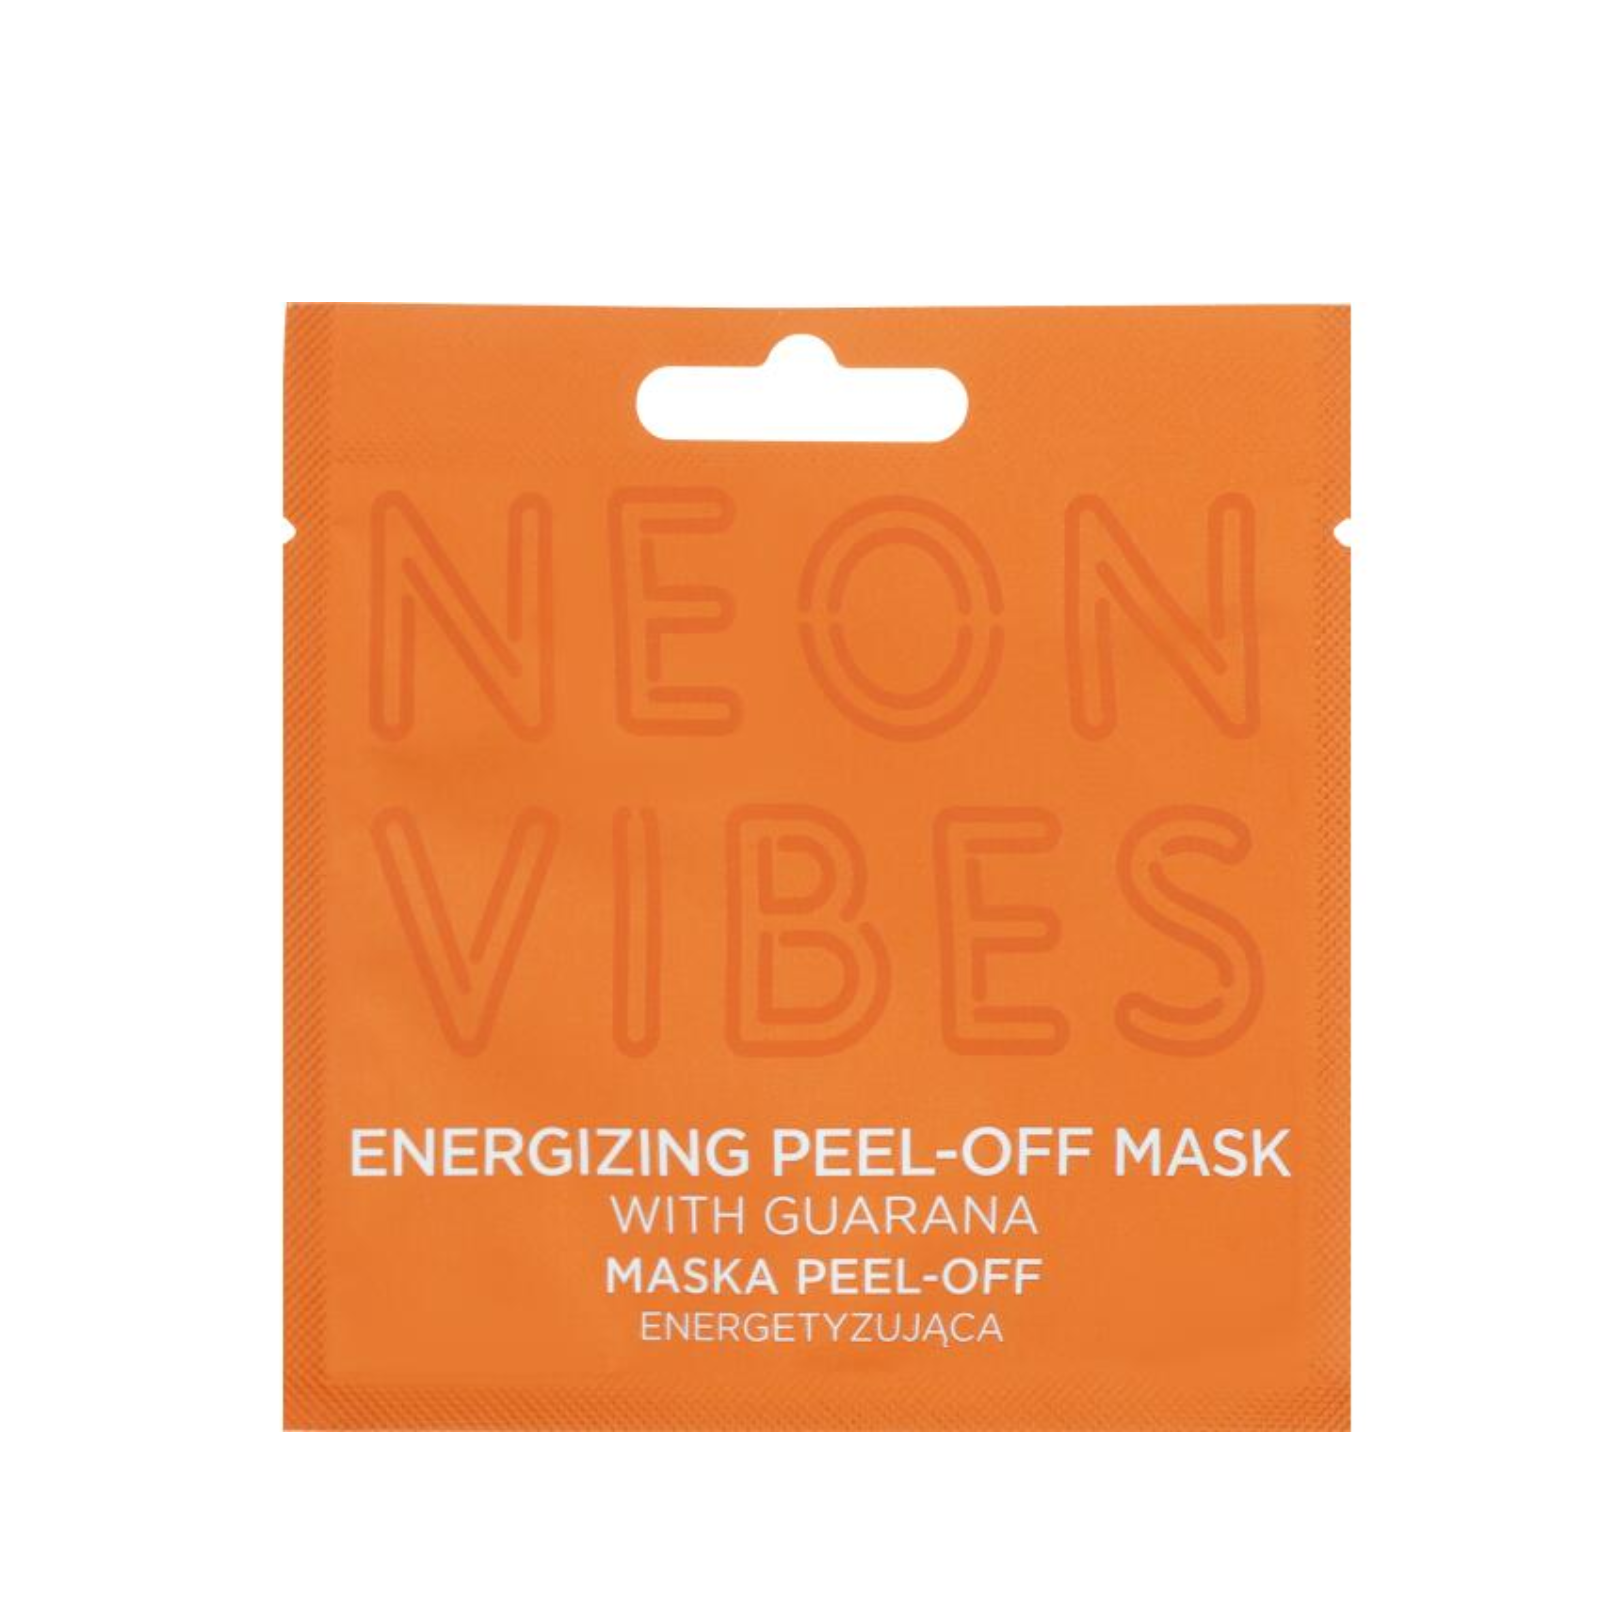 BACCOLINO NEON ENERGIZING PEEL-OFF FACE MASK 8G REF.3010